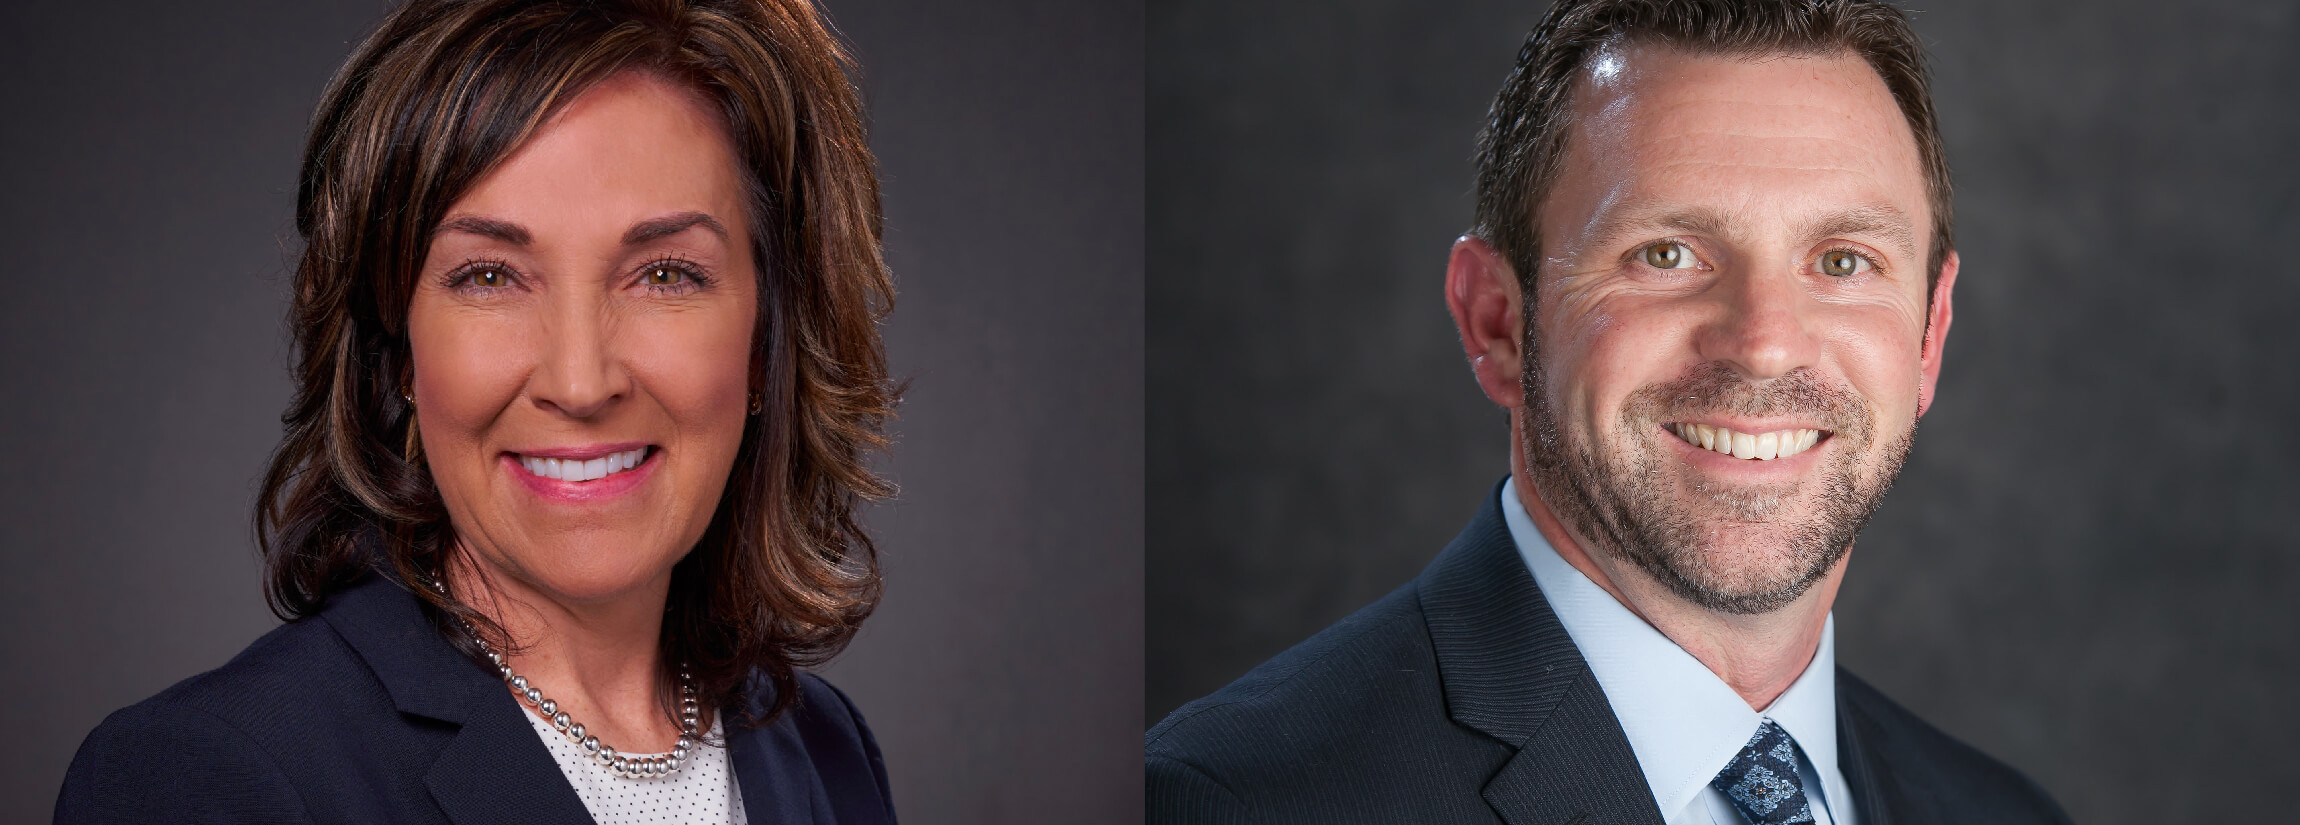 Colleen Lindholz and John King side-by-side headshots.